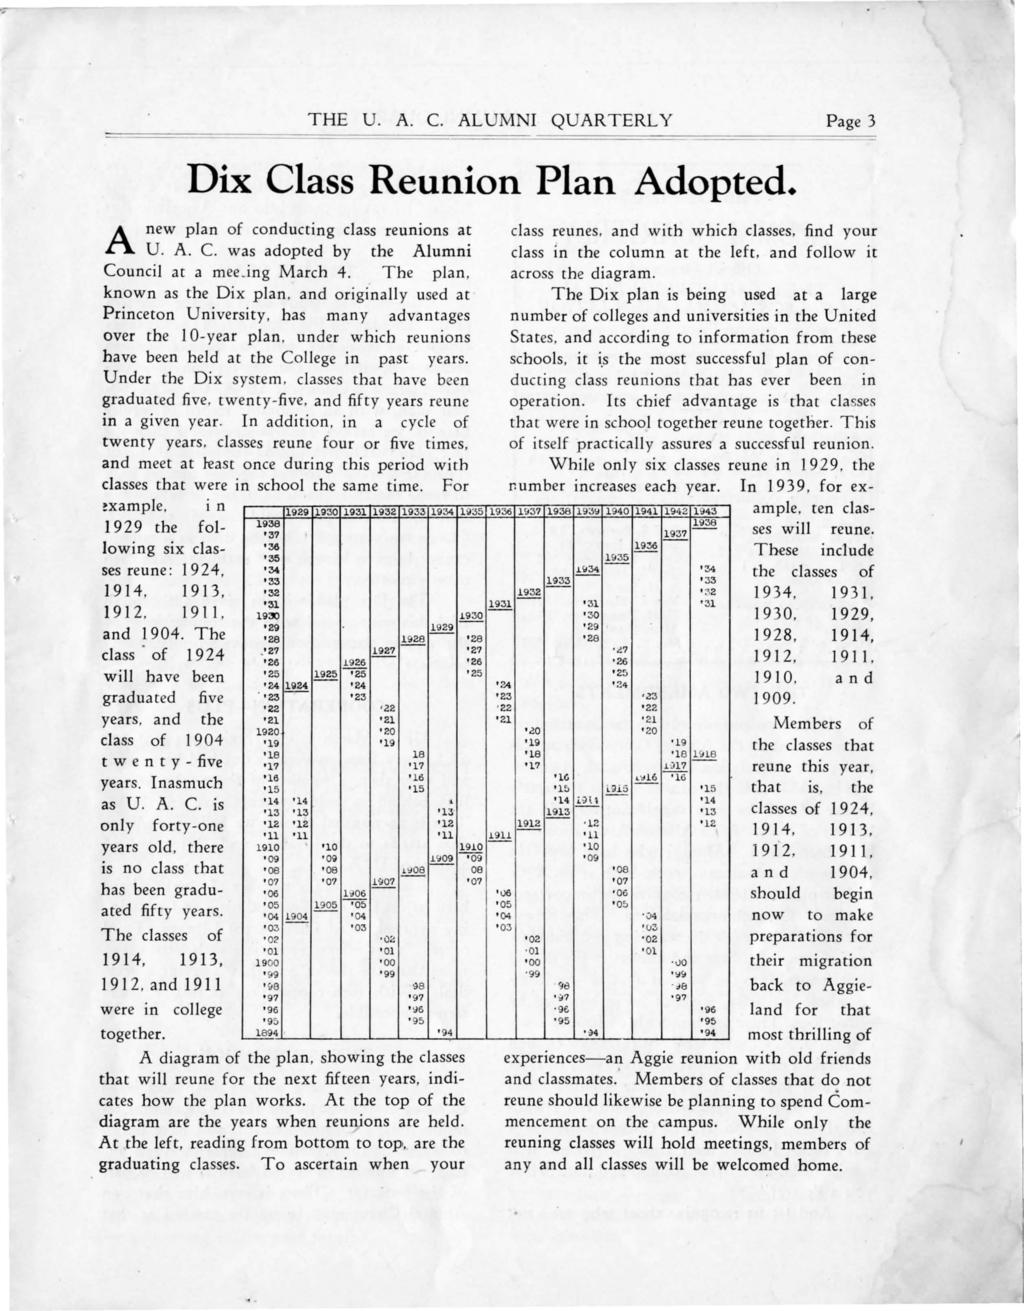 A THE U. A. C. ALUM QUARTERLY Page 3 Dx Class Reunon Plan Adopted. new plan of conductng class reunons at U. A. C. was adopted by the Alumn Councl at a mee_ng March 4.